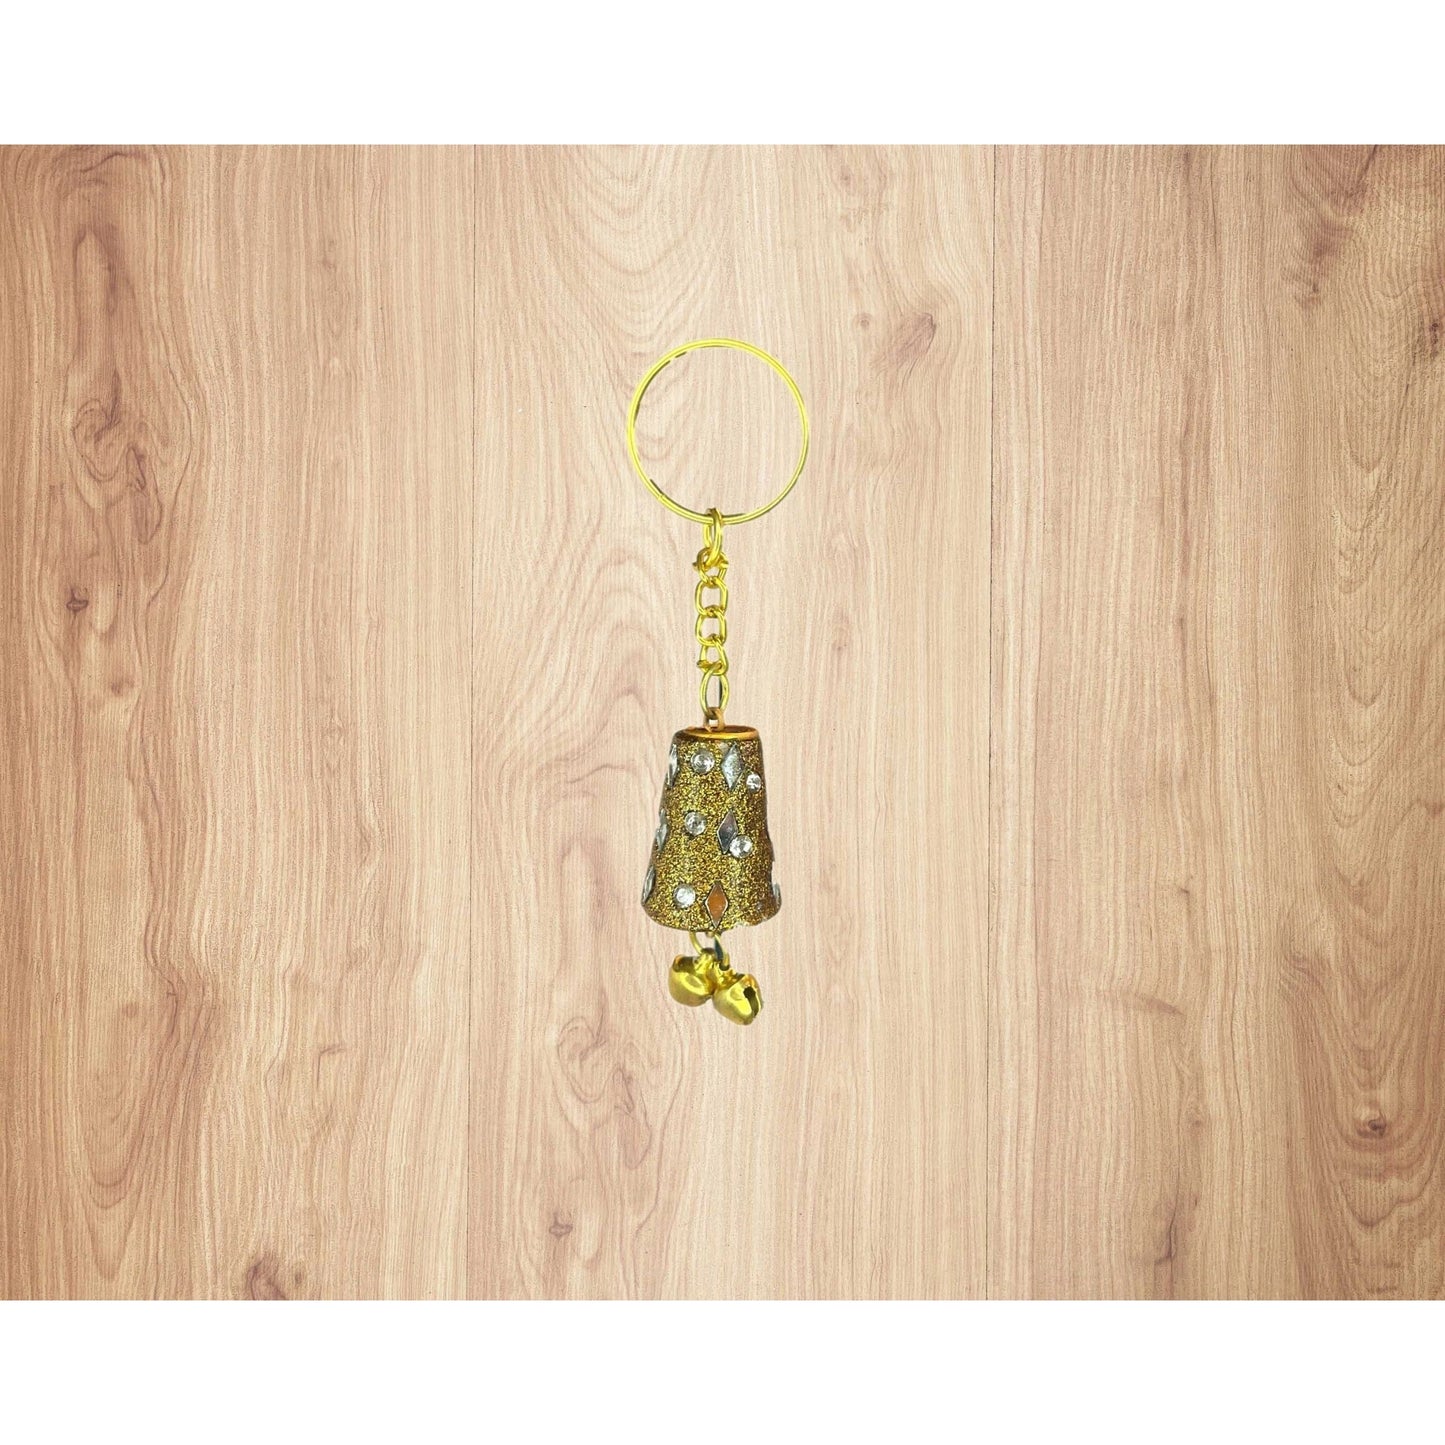 Handmade Rajasthani Bell Keychain - Assorted Colors